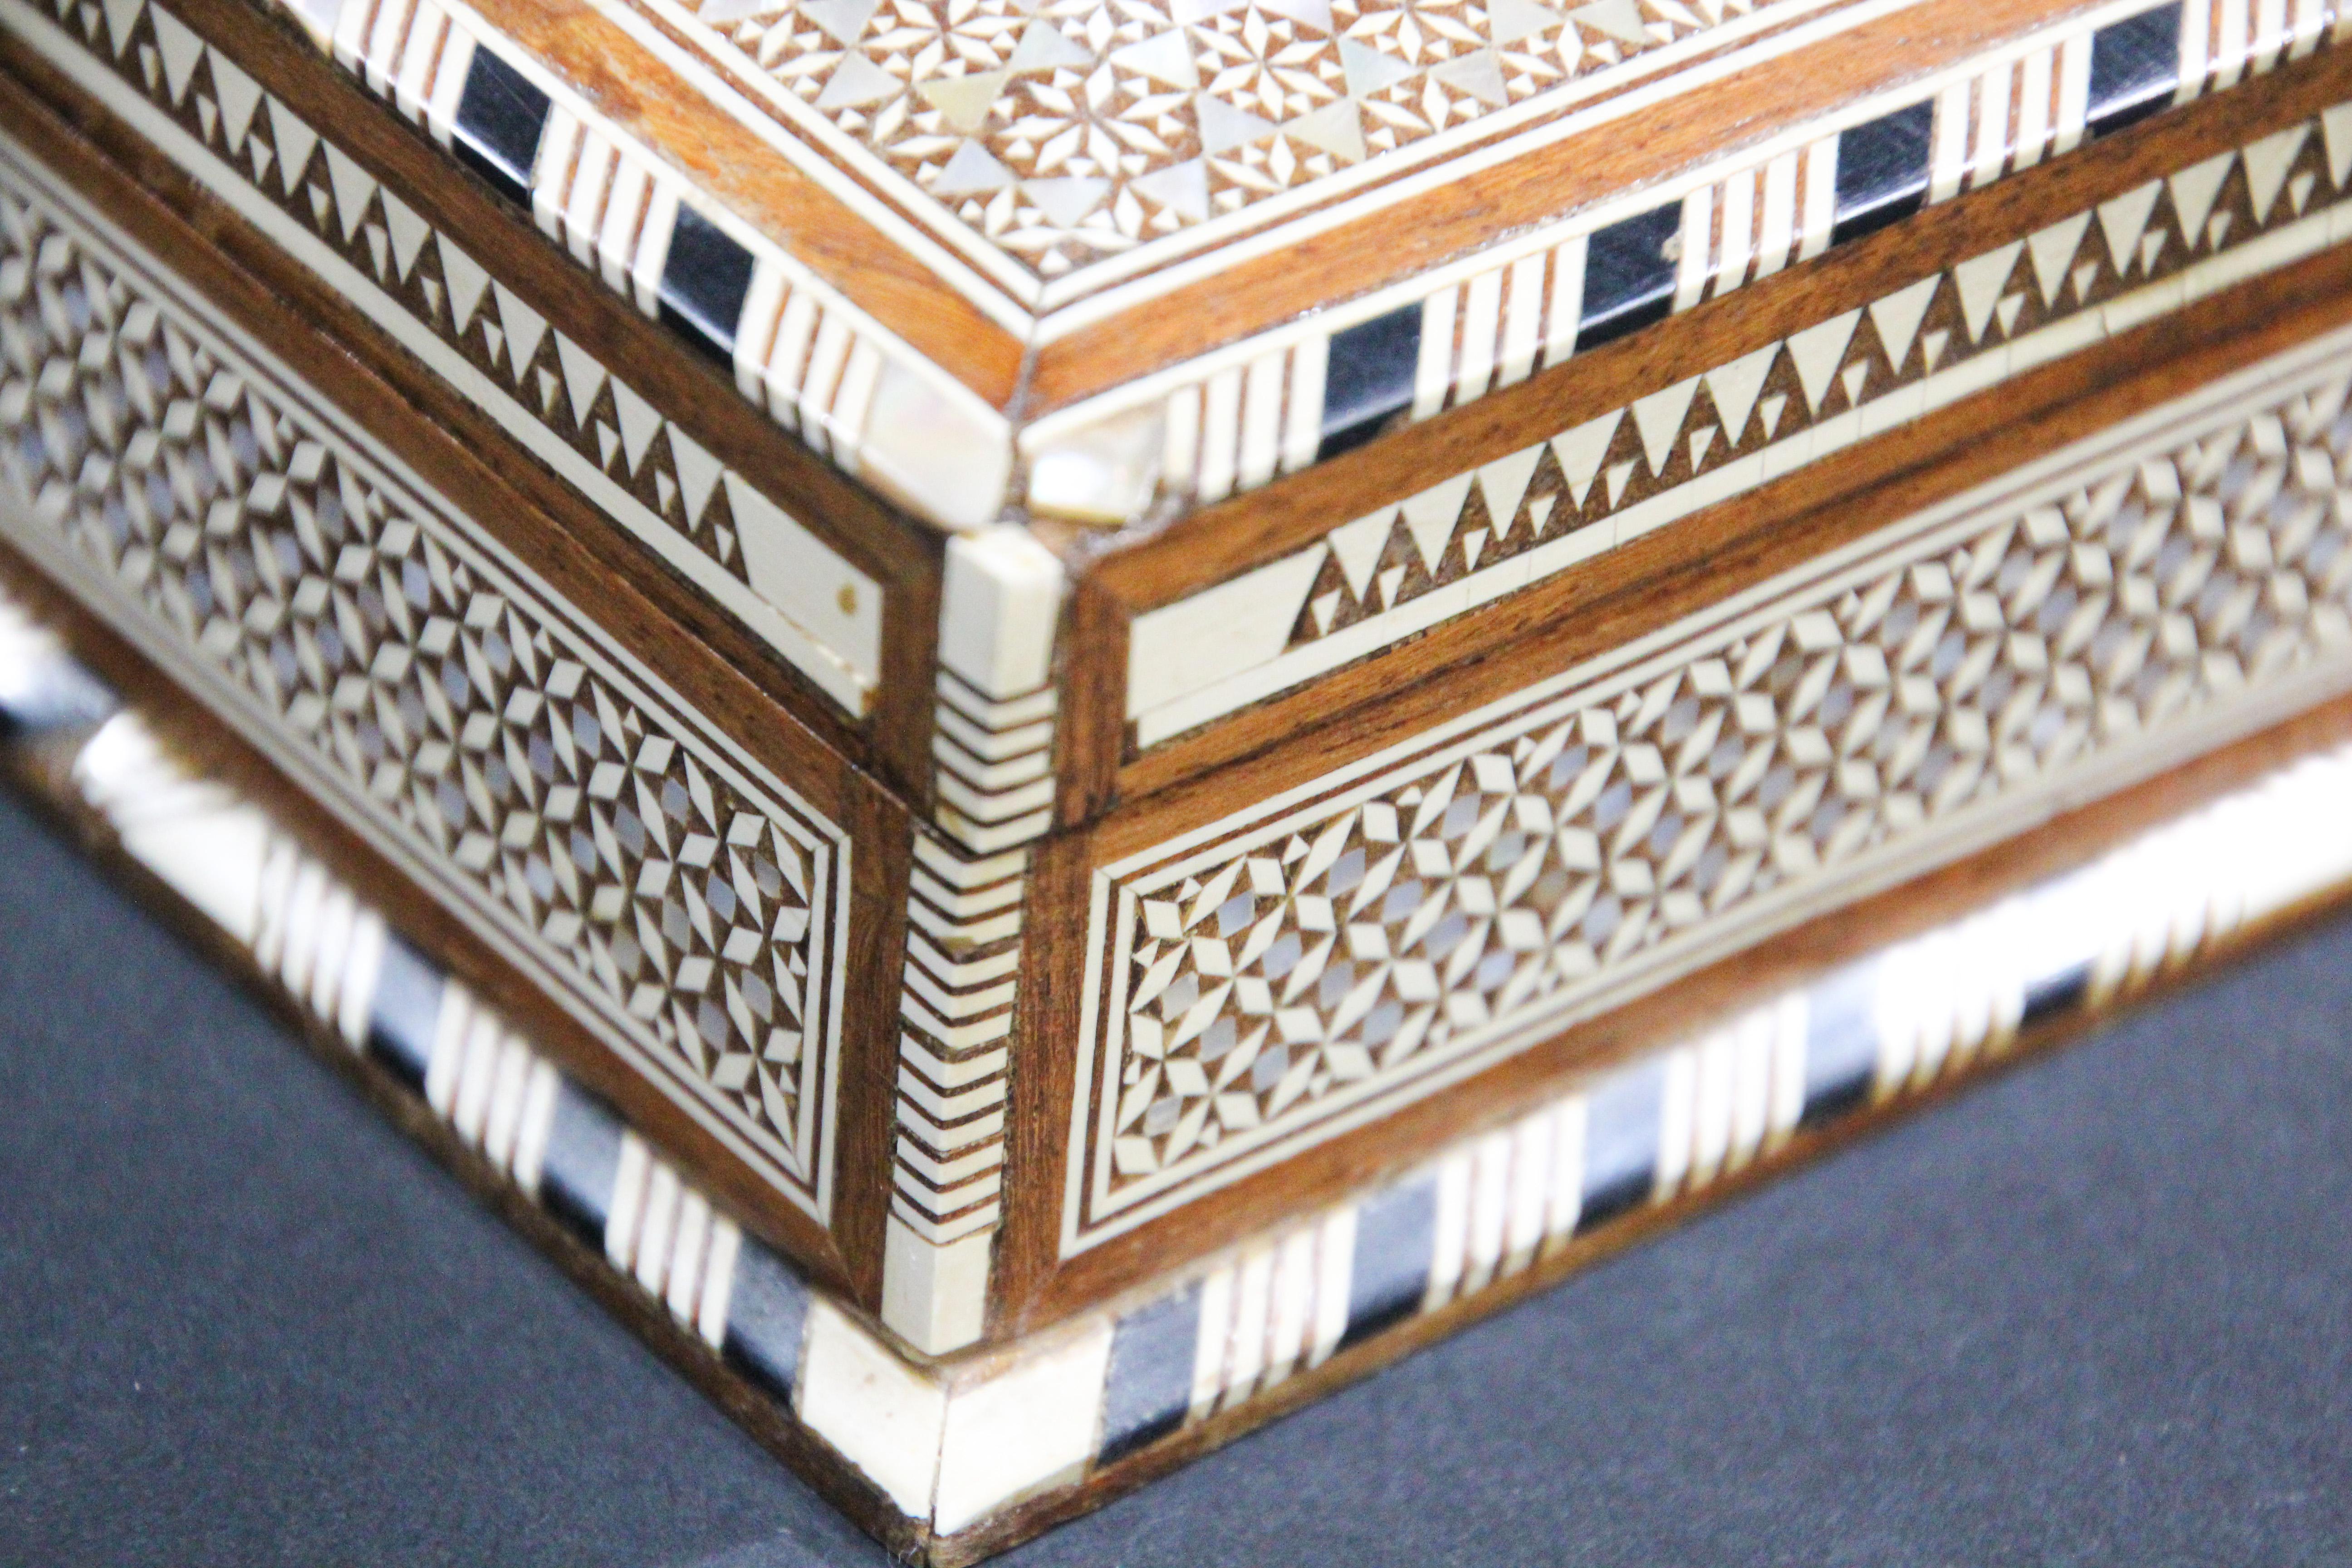 Moorish Handcrafted Middle Eastern Mosaic Inlaid Decorative Box For Sale 7